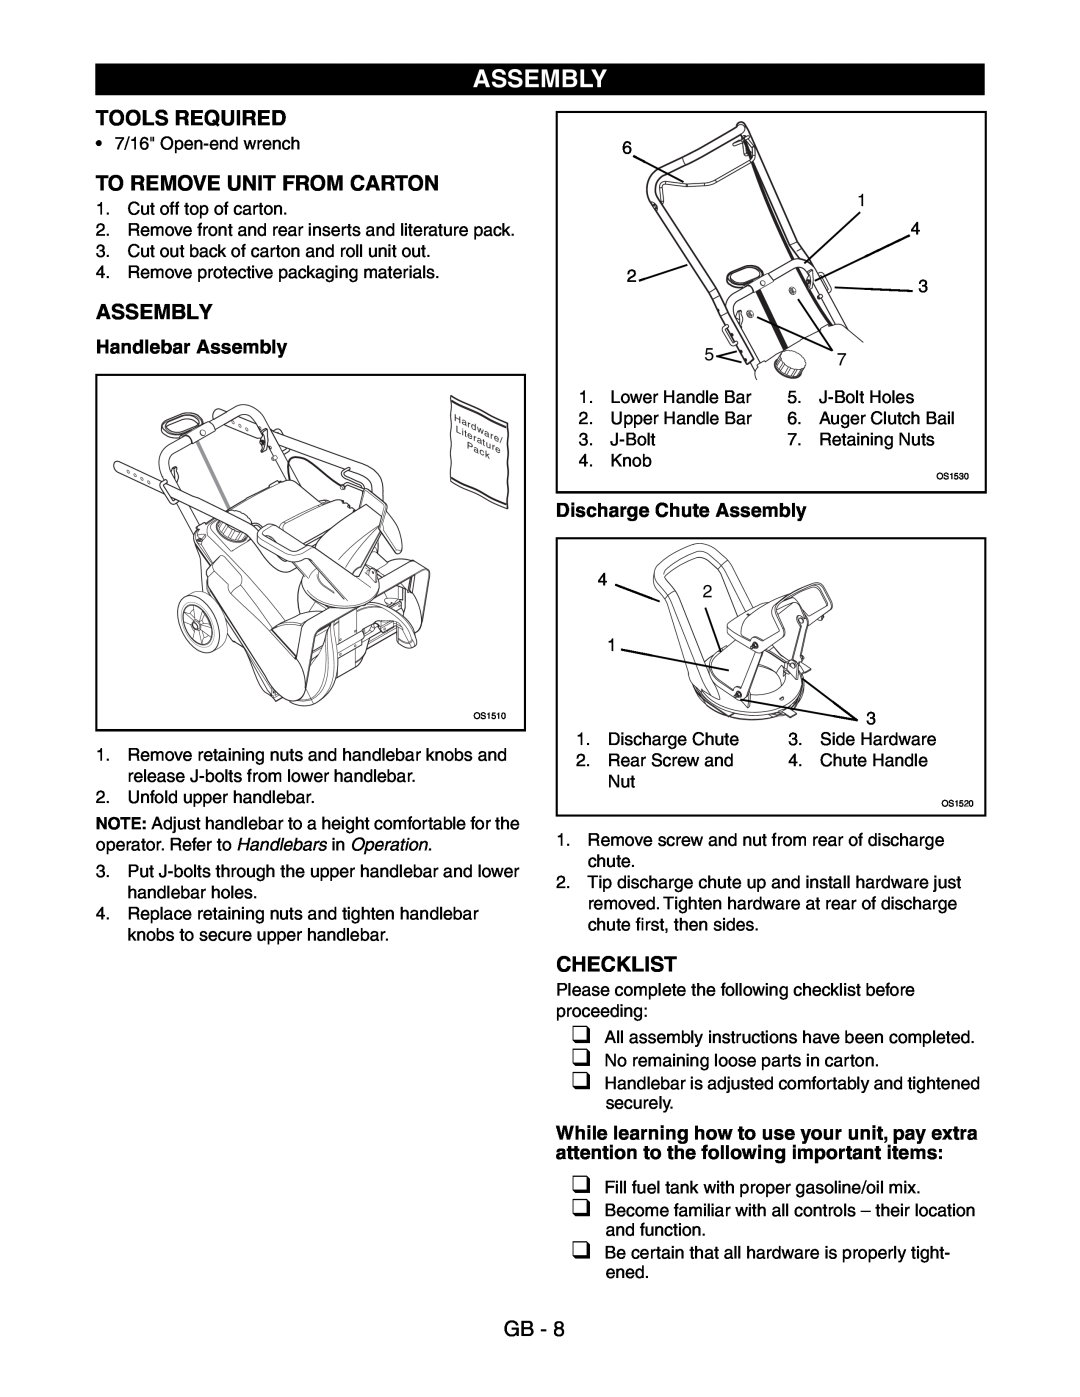 Ariens 938016 - 522 manual Tools Required, To Remove Unit From Carton, Checklist, Handlebar Assembly 